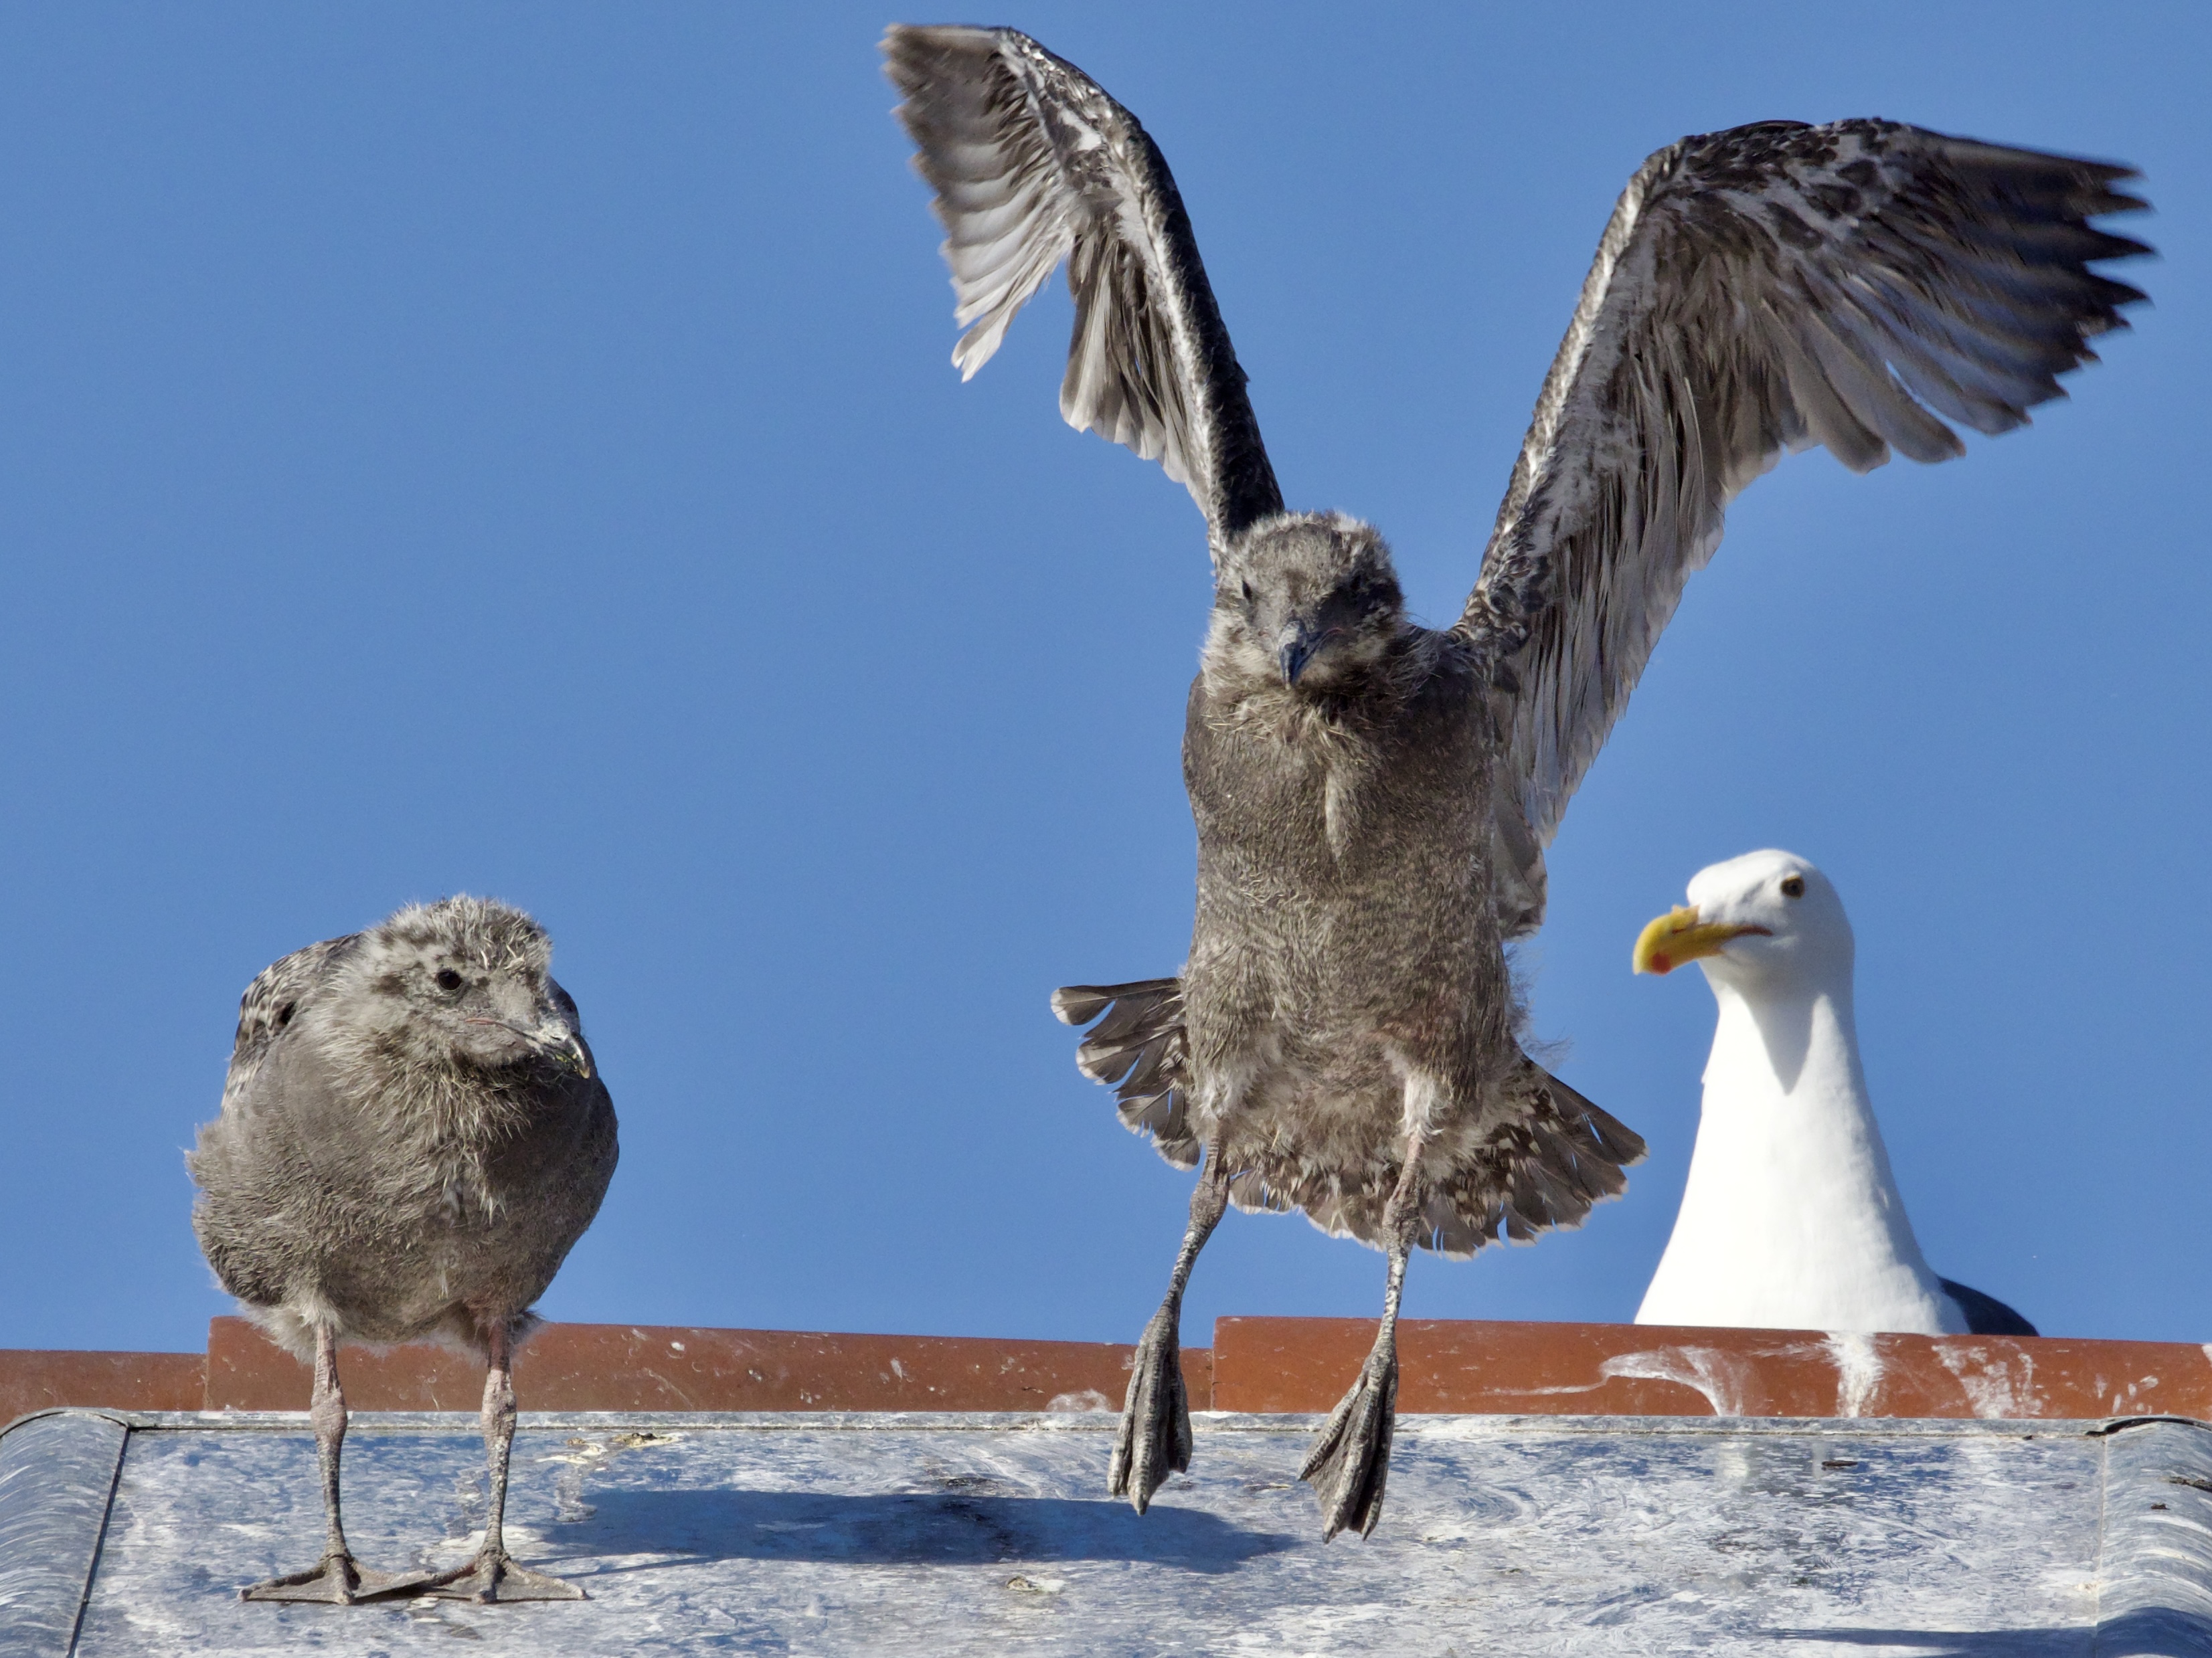 Western Gull Chicks Learning to Fly